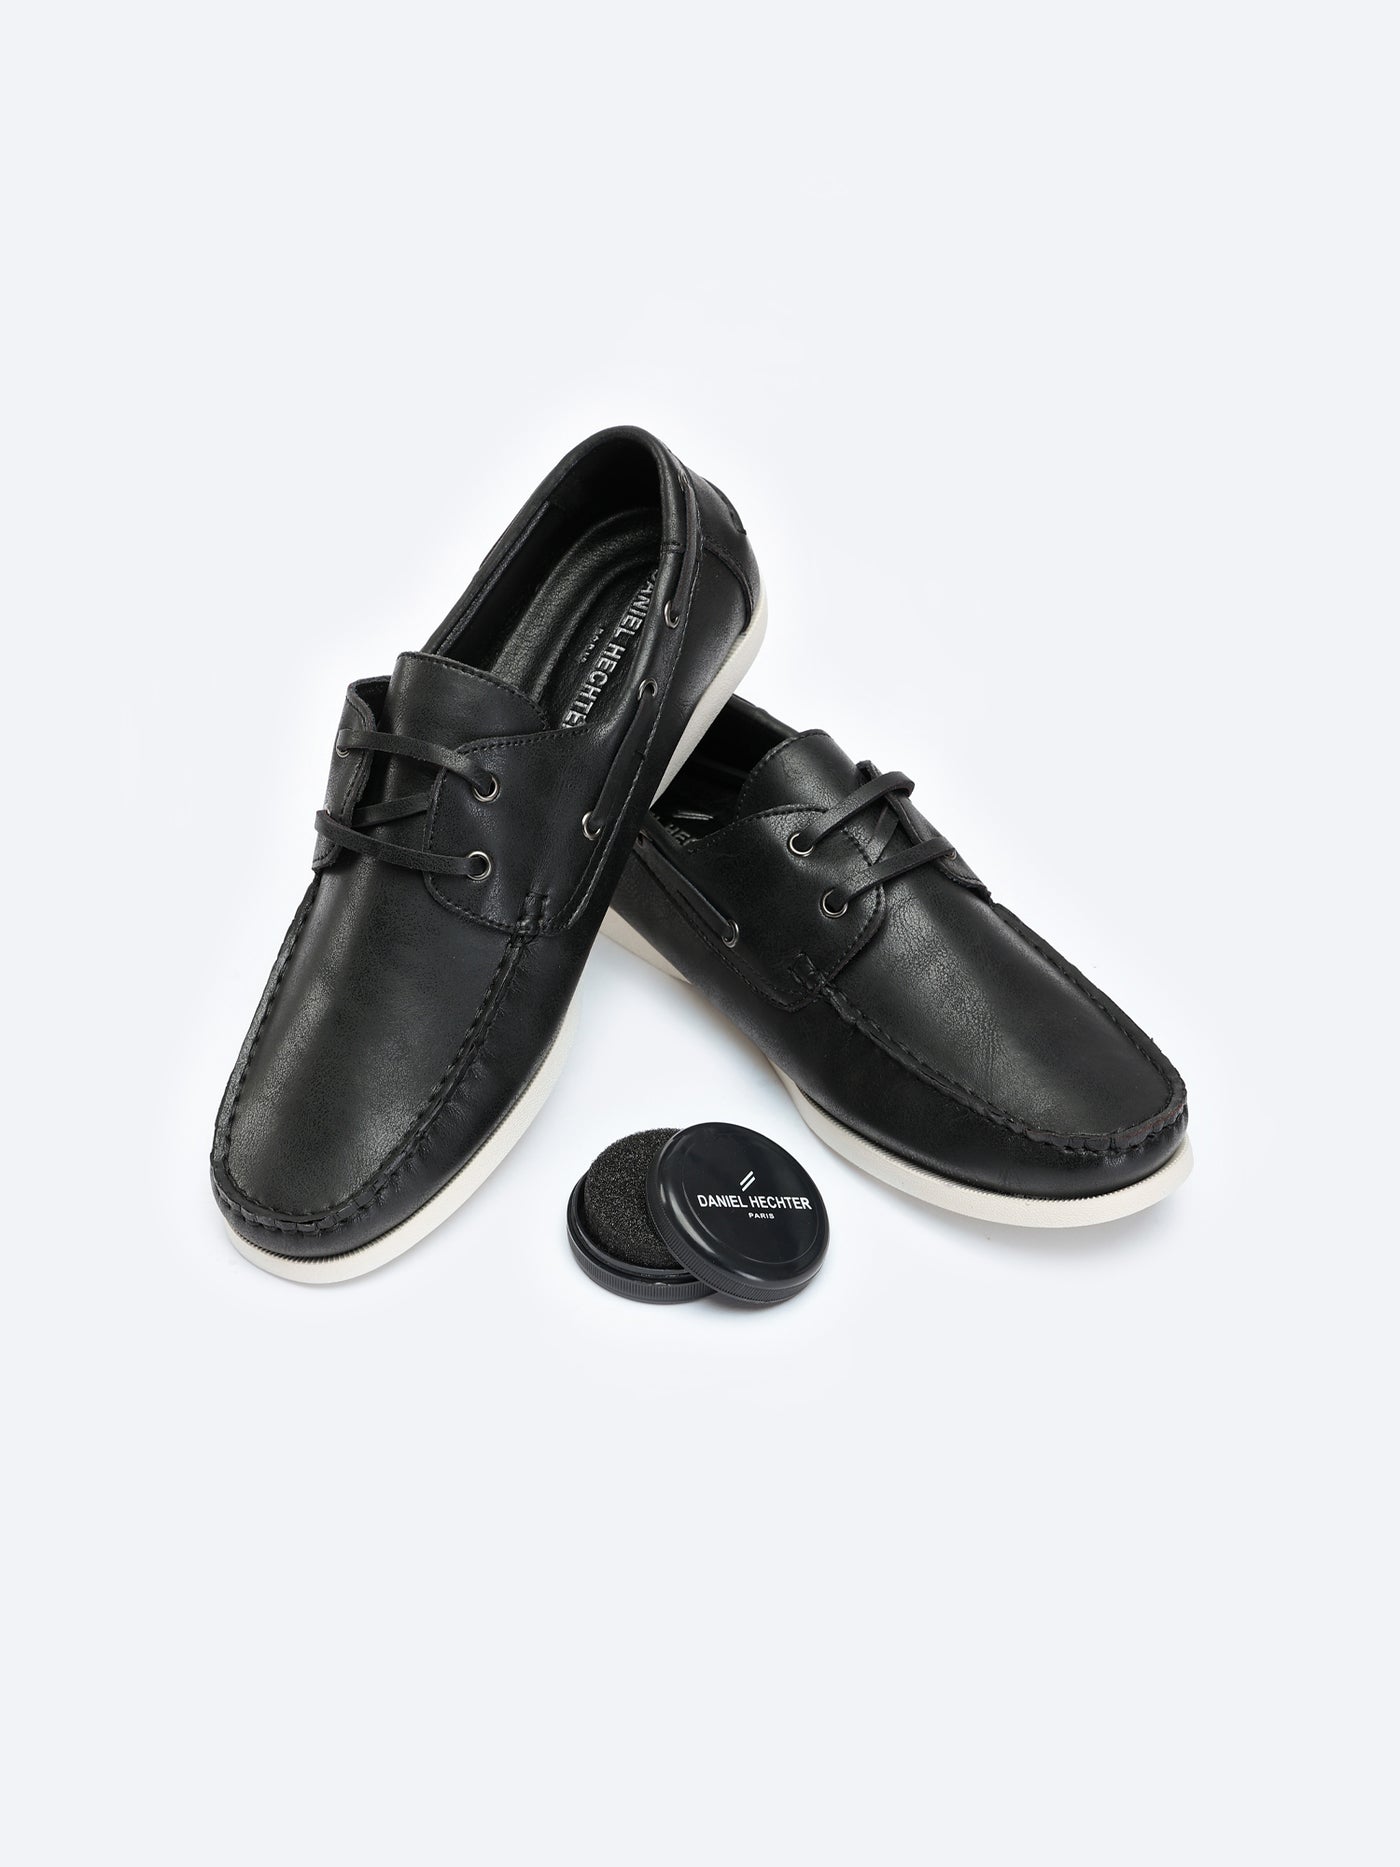 Loafers - Slip-on - Stitched